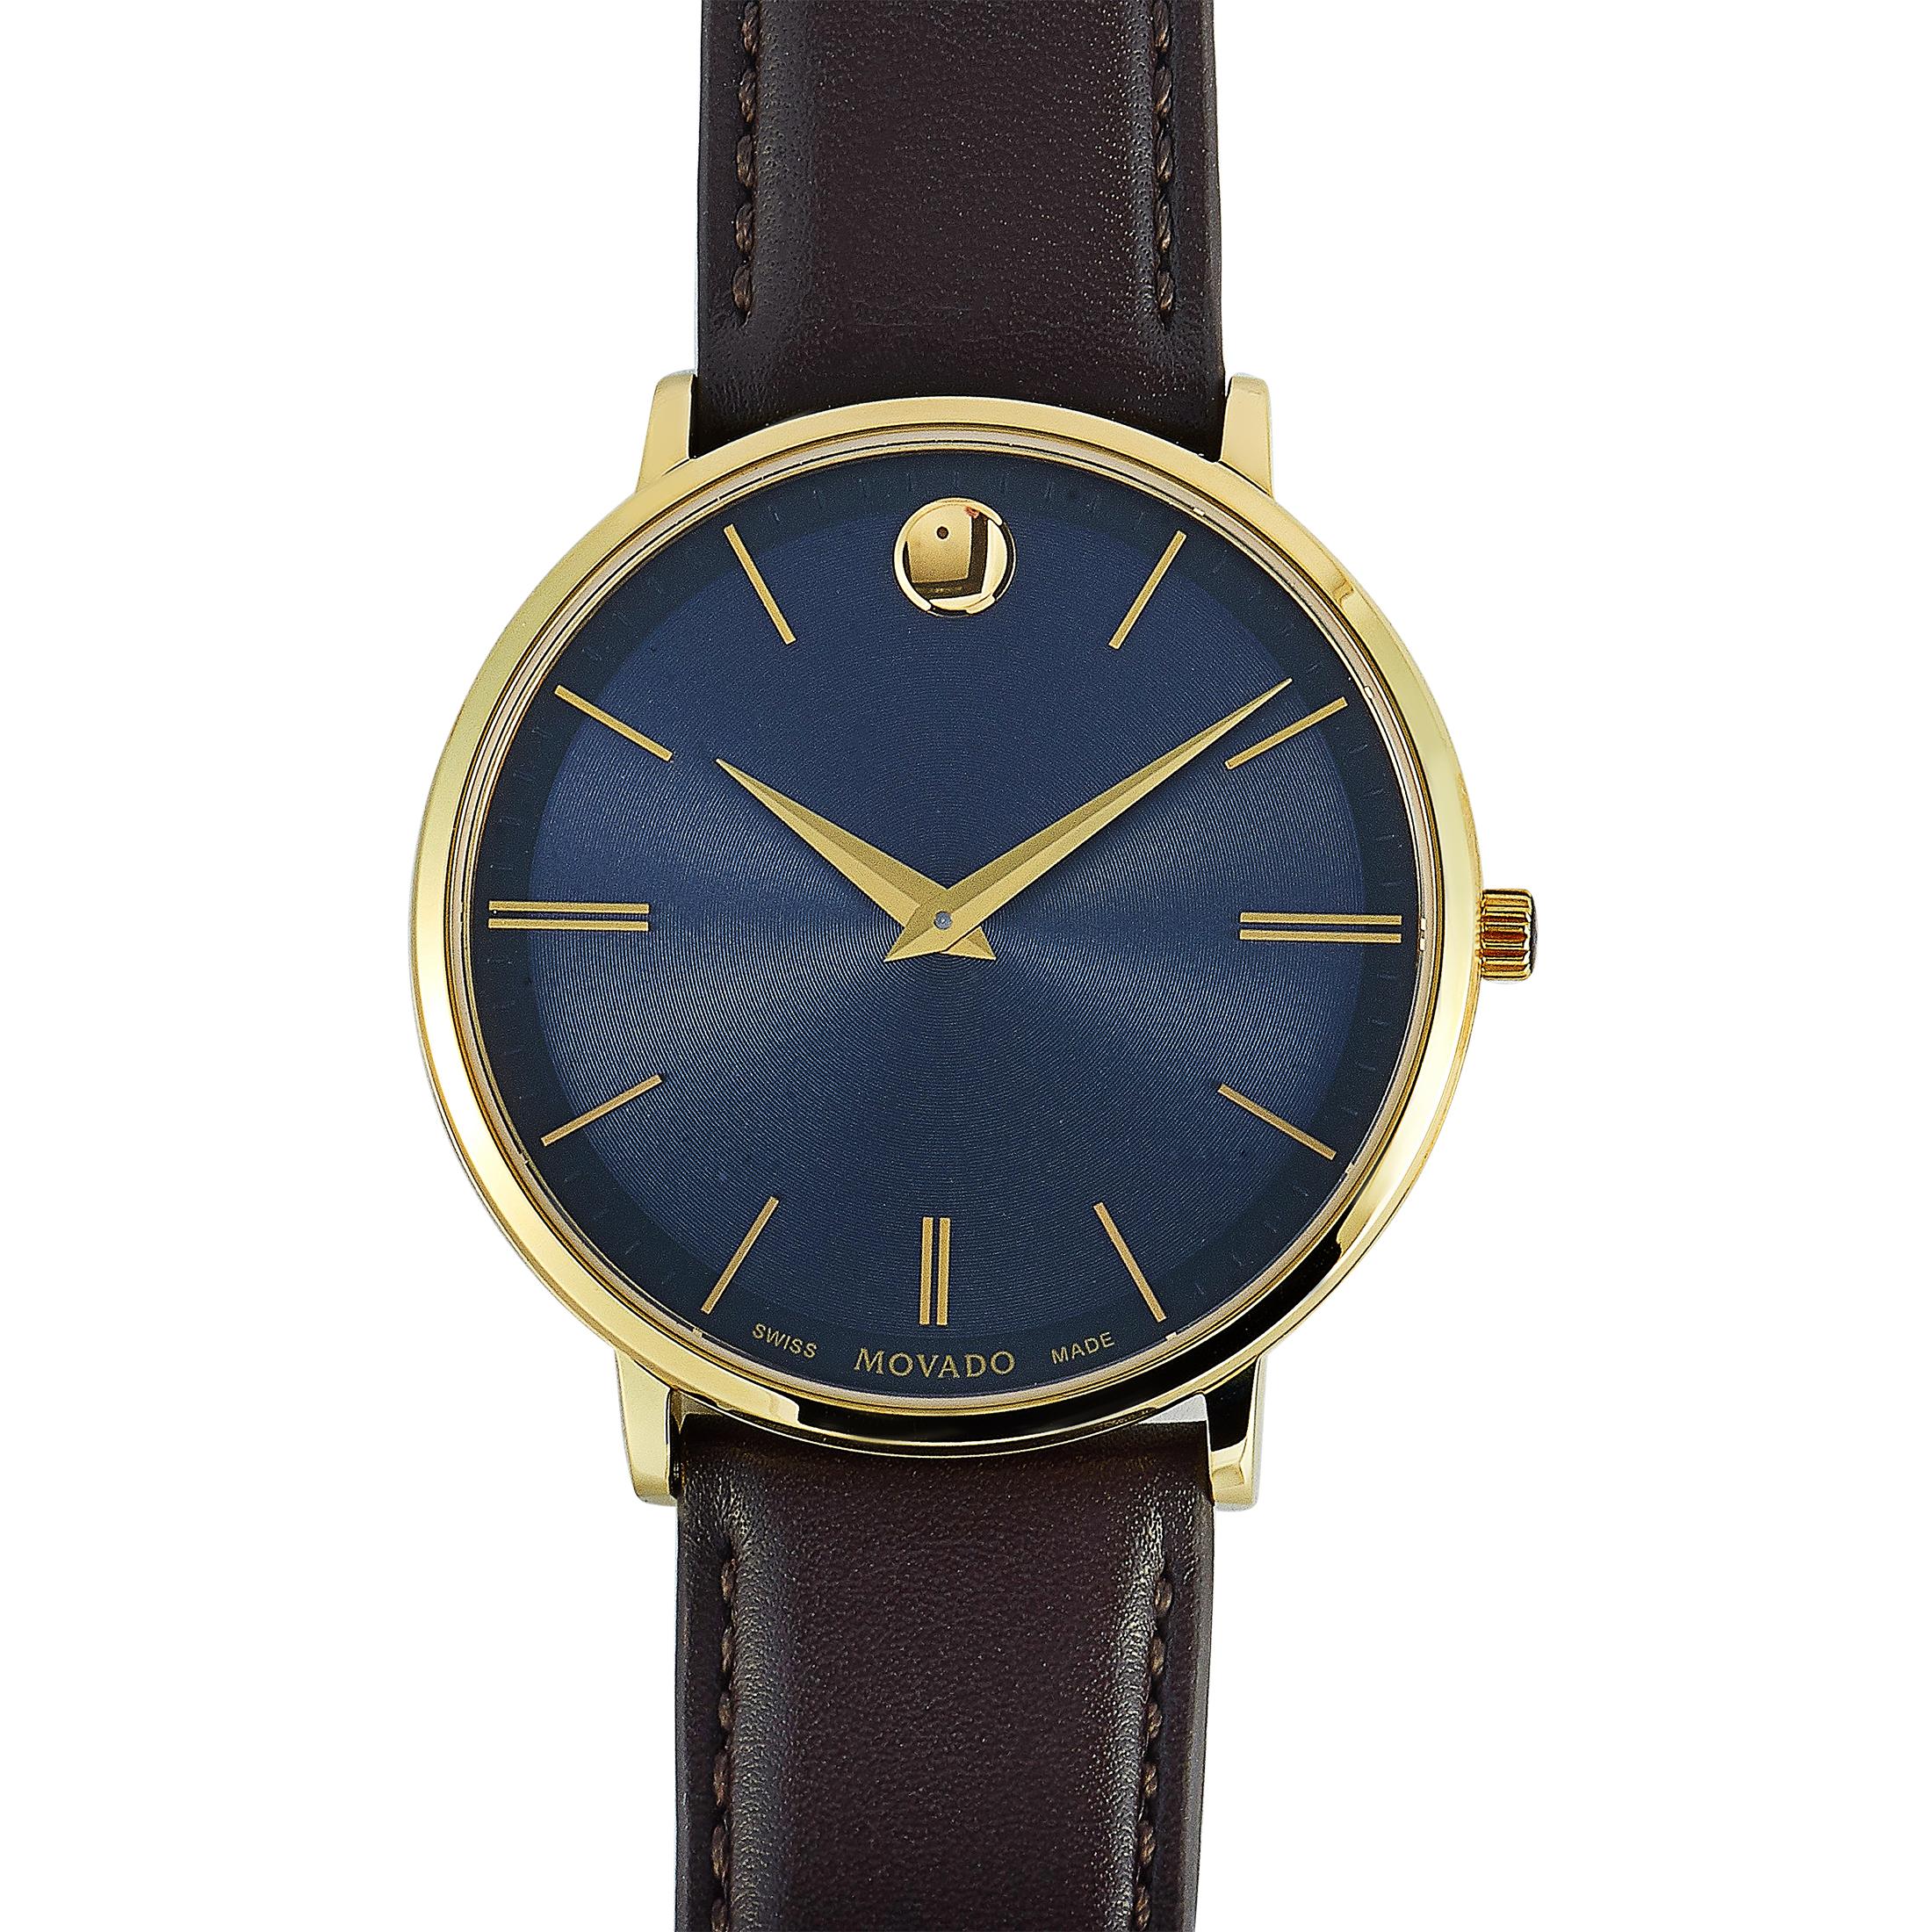 This is the Movado Ultra Slim watch, reference number 0607088.

It is presented with a yellow gold PVD-plated stainless steel case that is only 6.3 mm thick and measures 40 mm in diameter. The watch is powered by a quartz movement and indicates